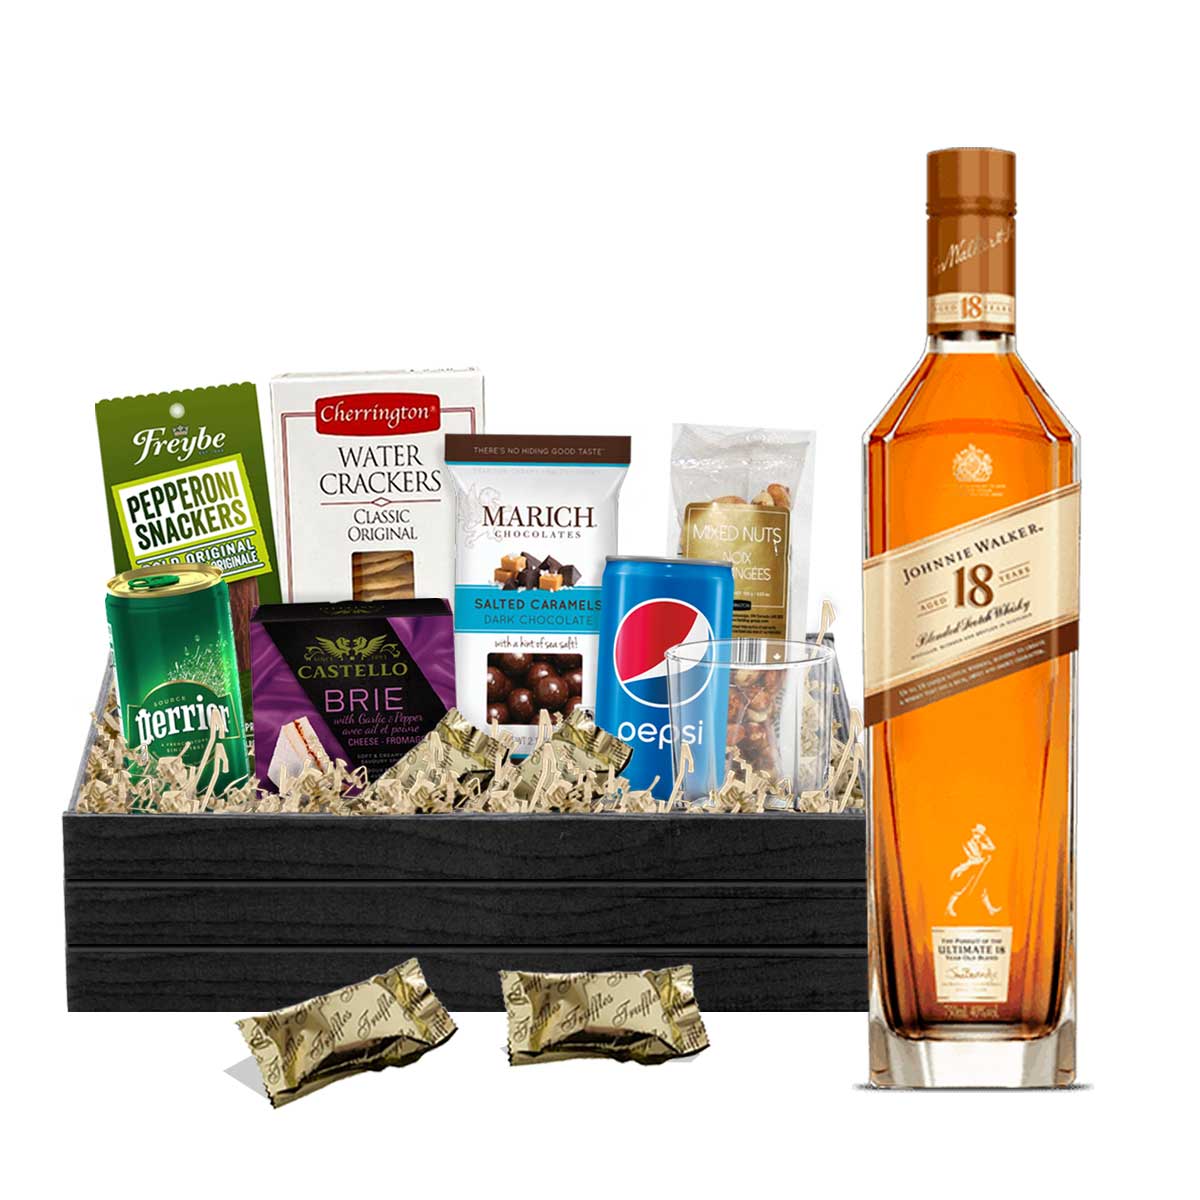 TAG Liquor Stores BC - Johnnie Walker 18 Year Old Scotch Whisky 750ml Gift Basket